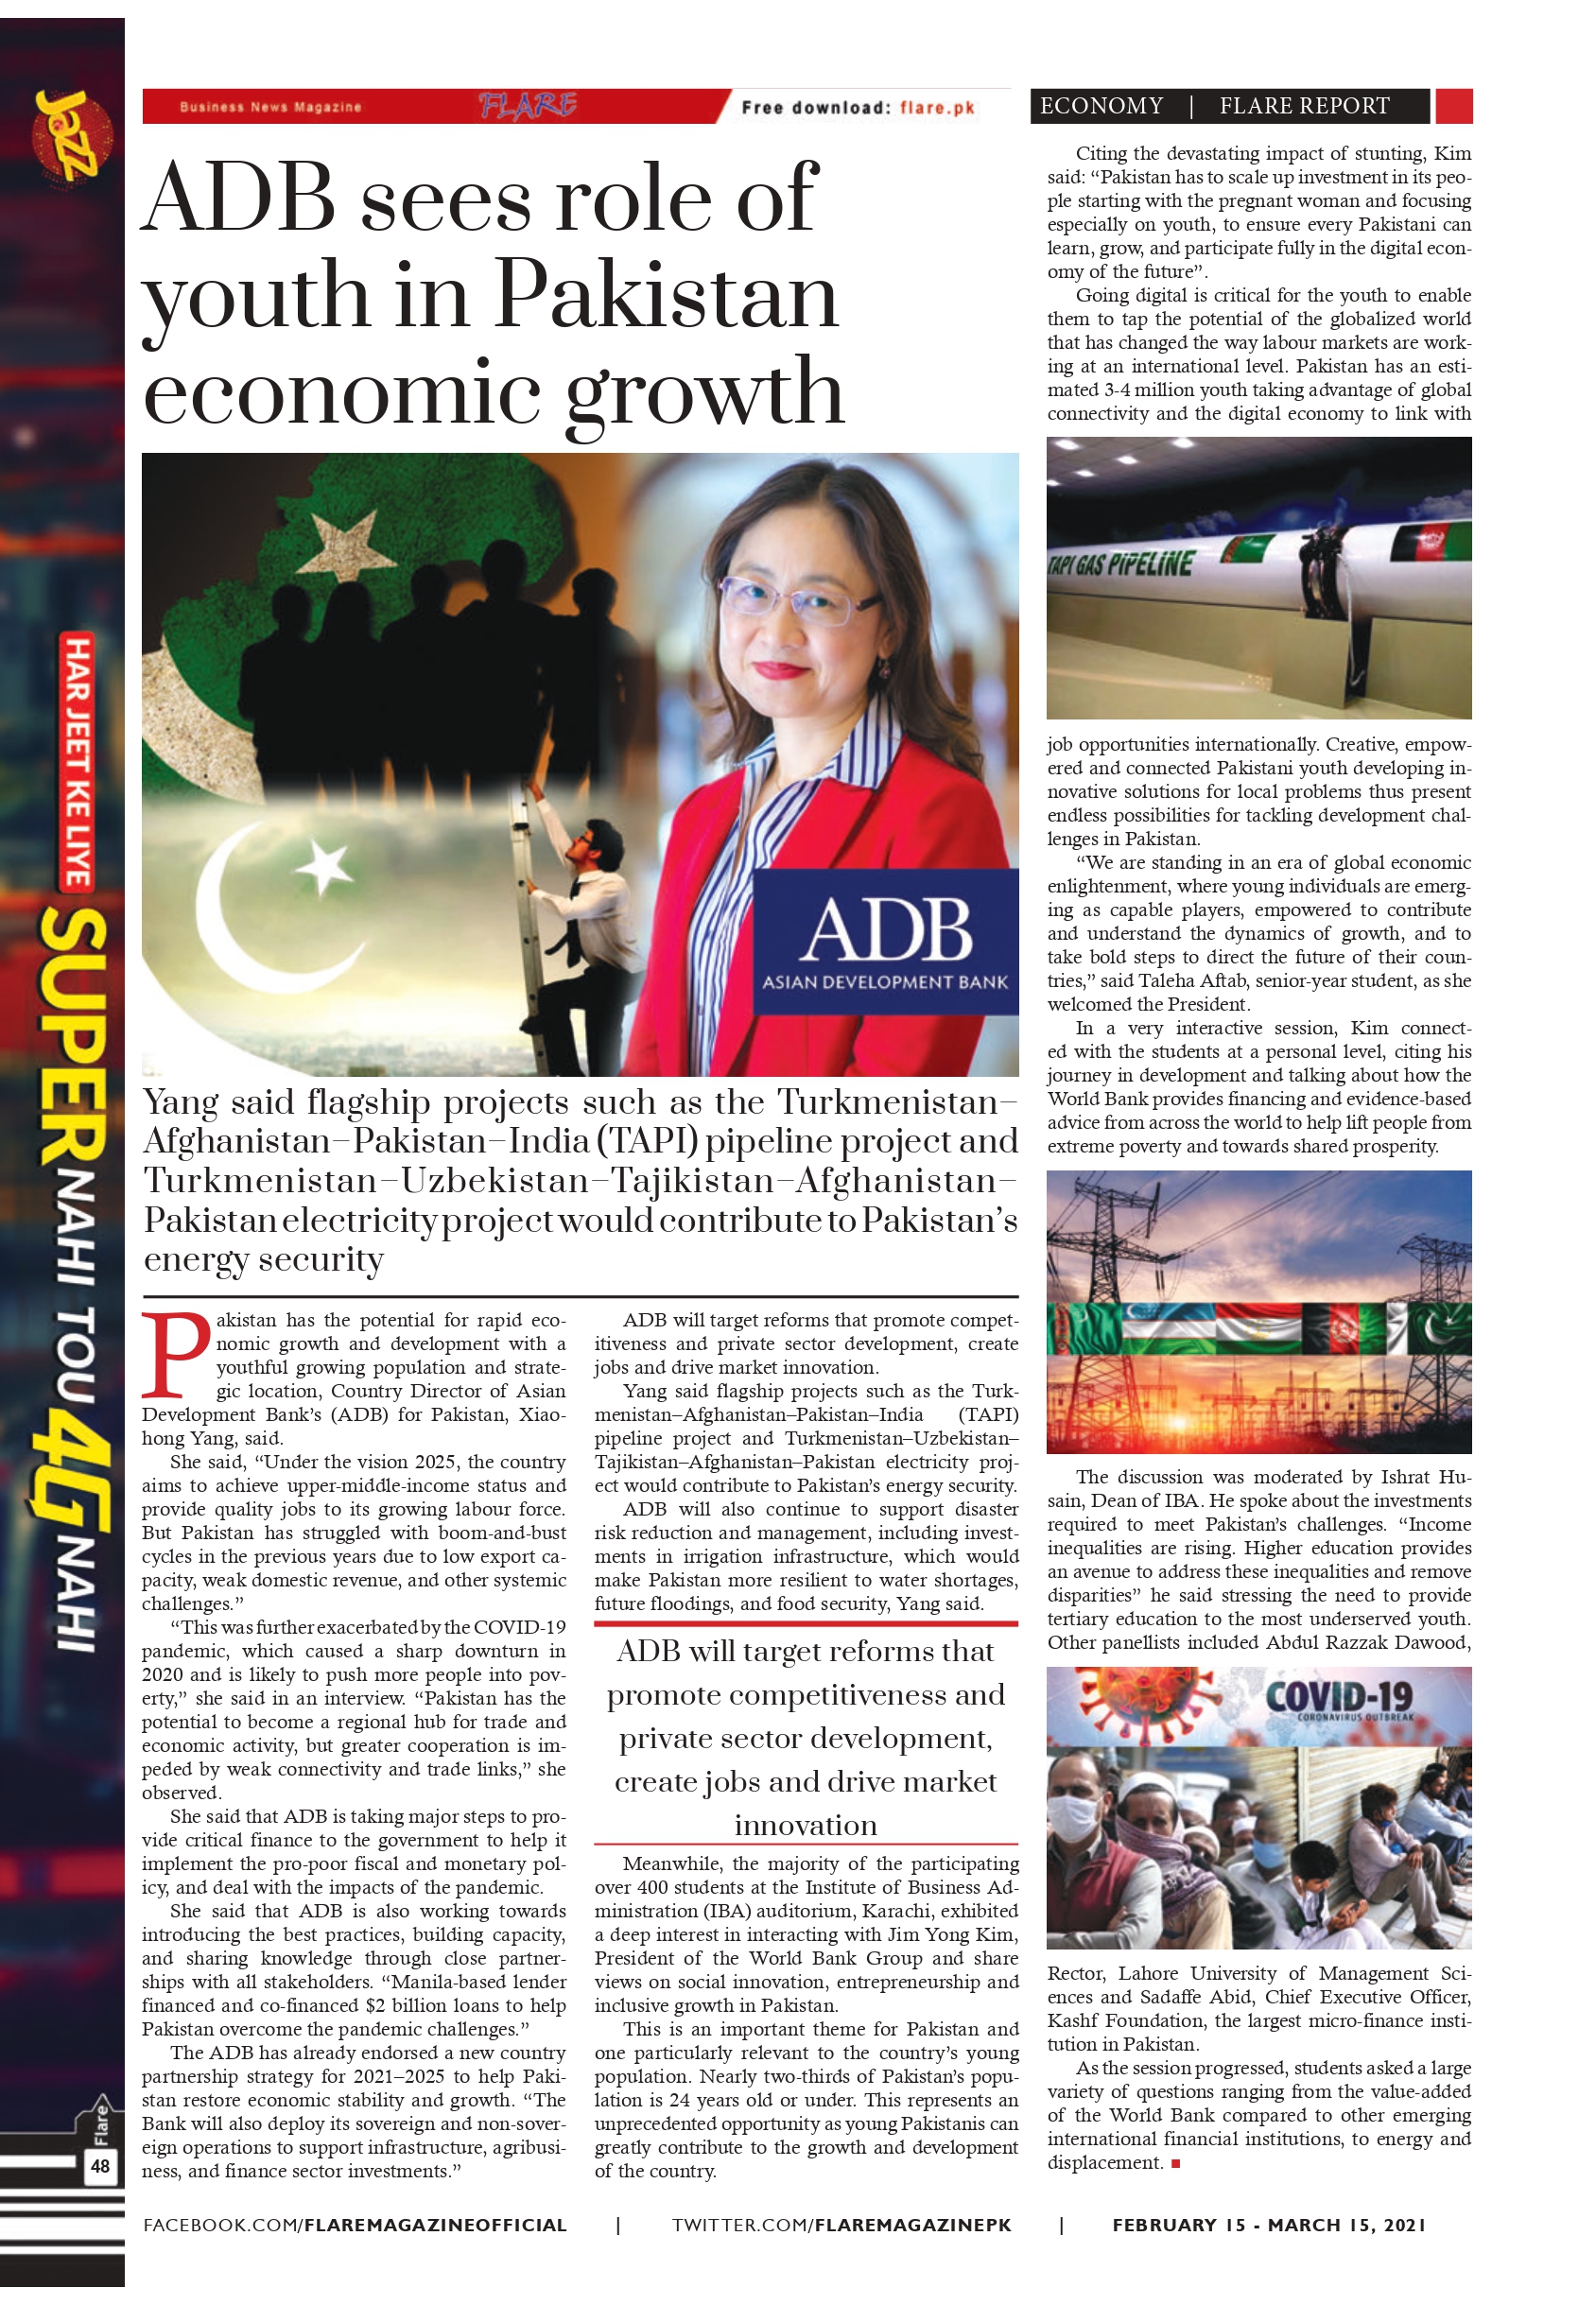 ADB sees role of youth in Pakistan economic growth